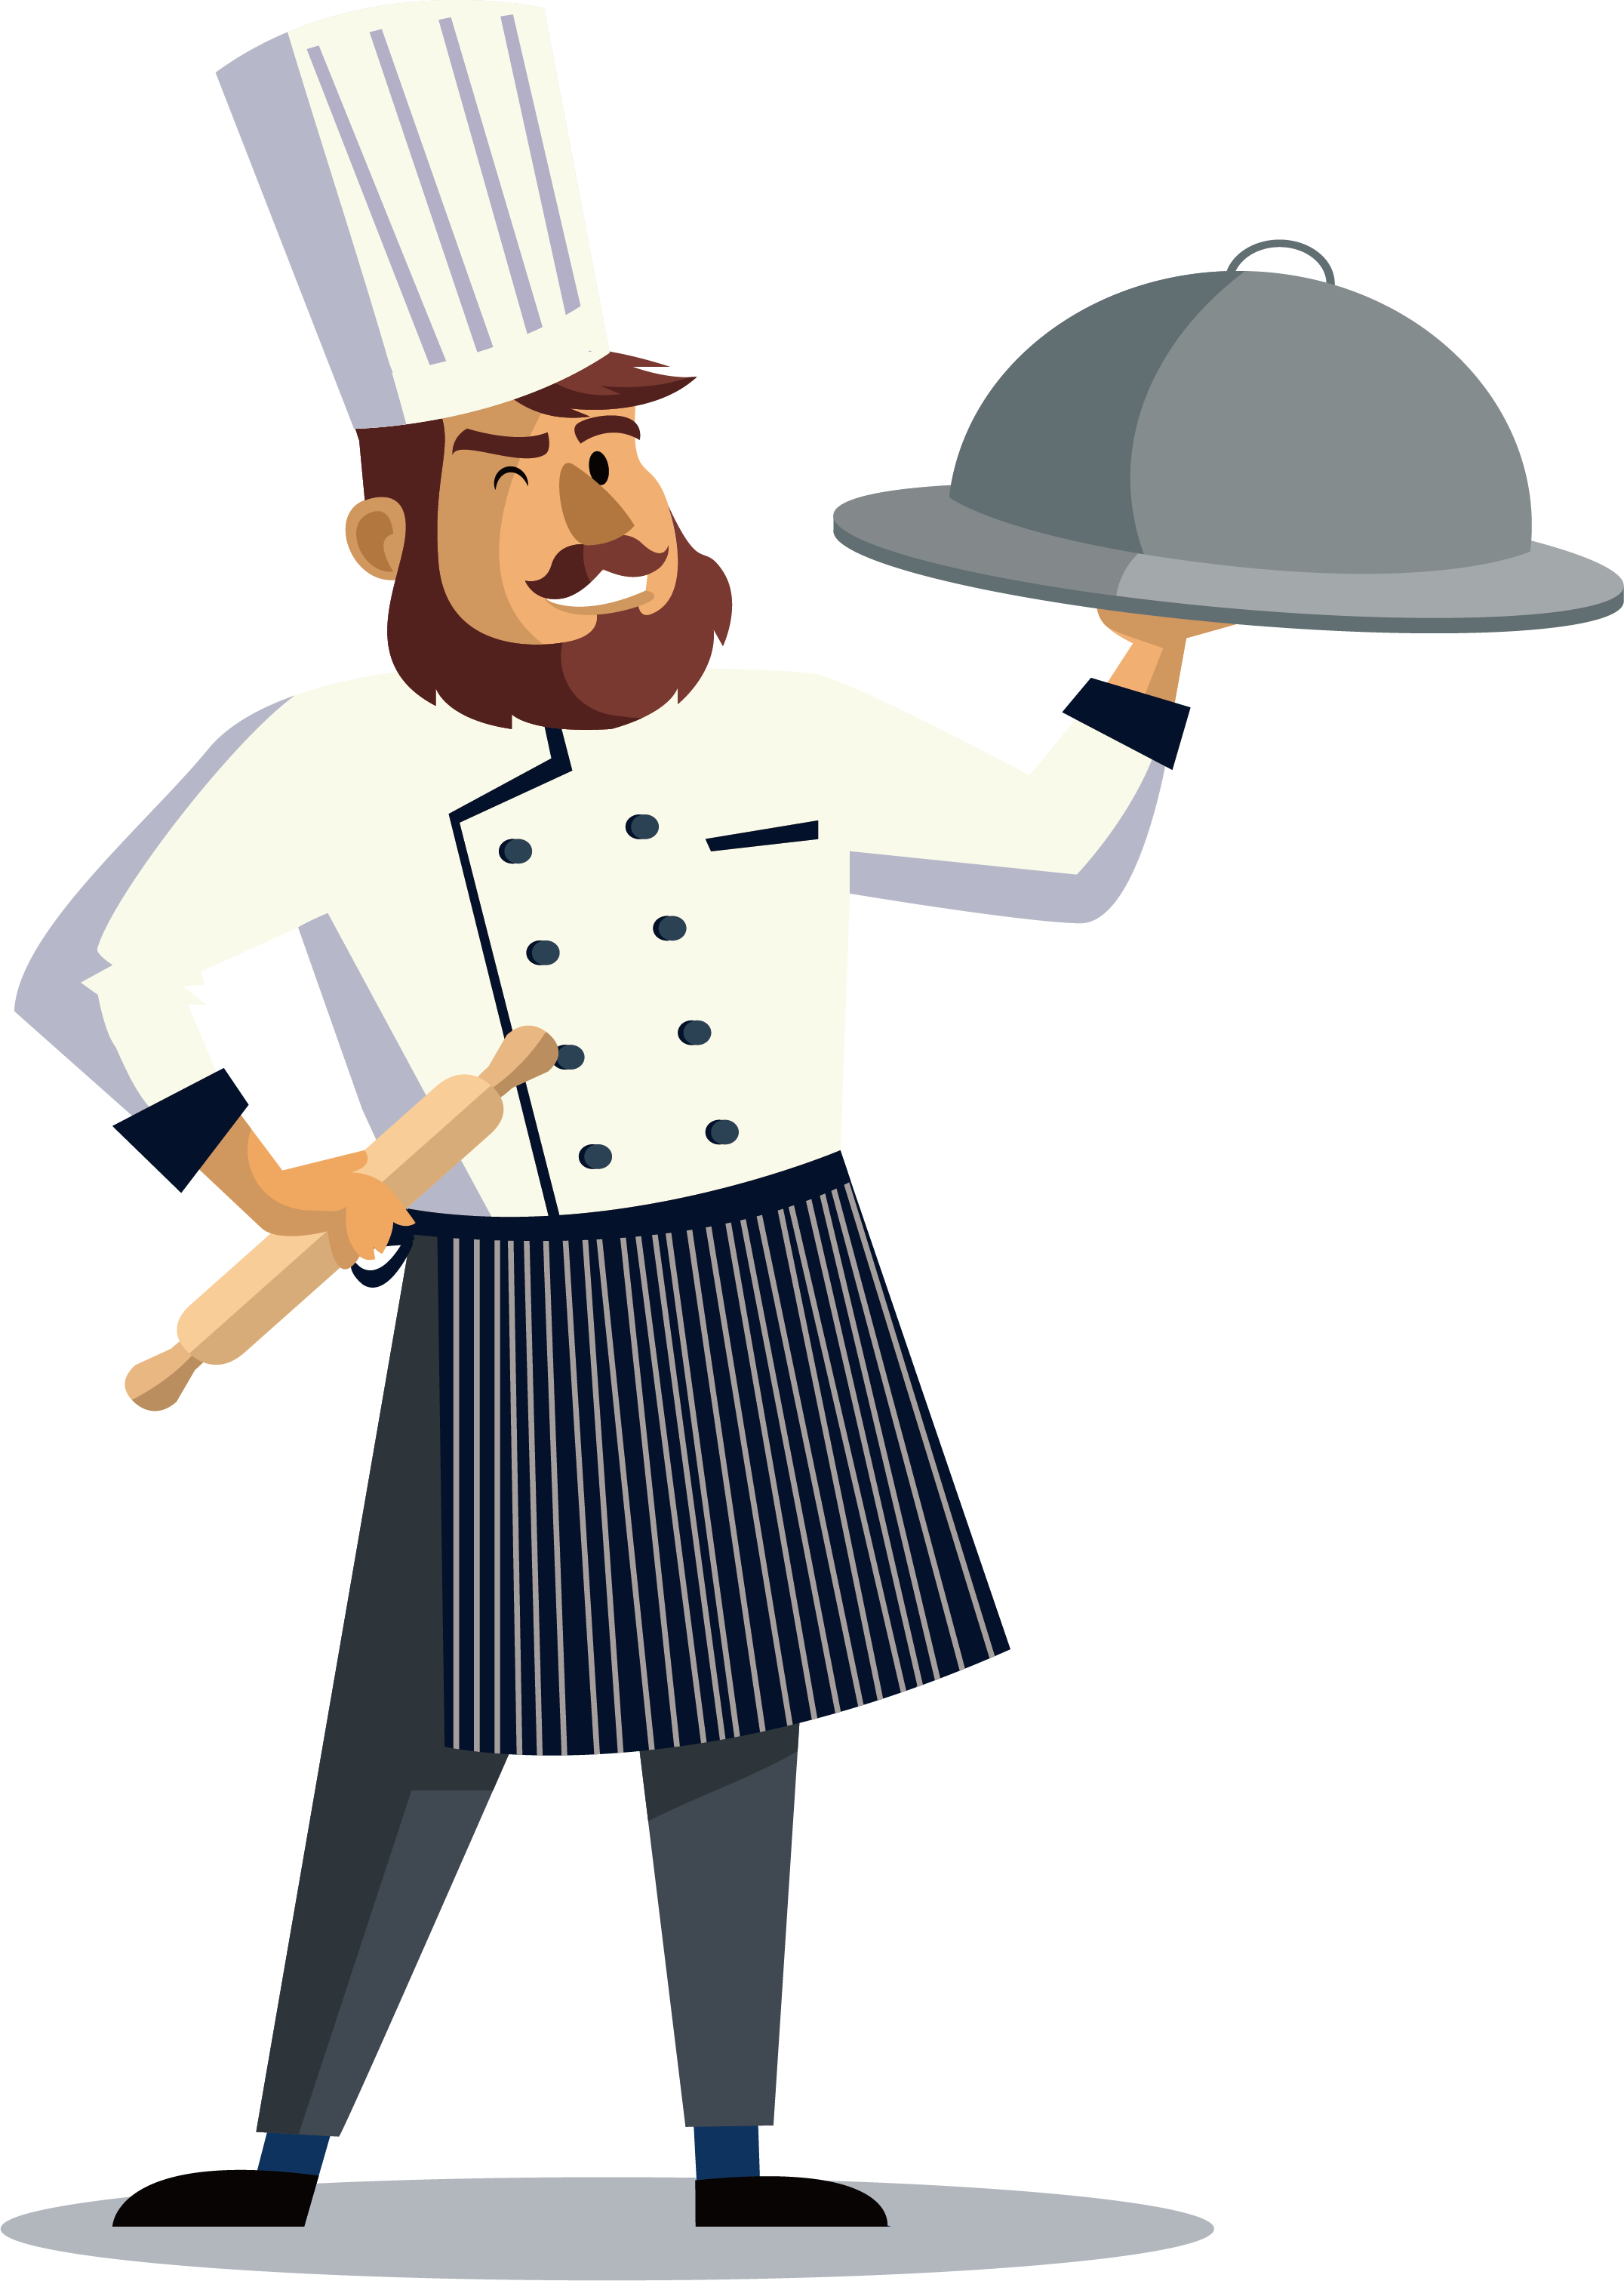 Chef Cook Restaurant PNG Image High Quality Clipart